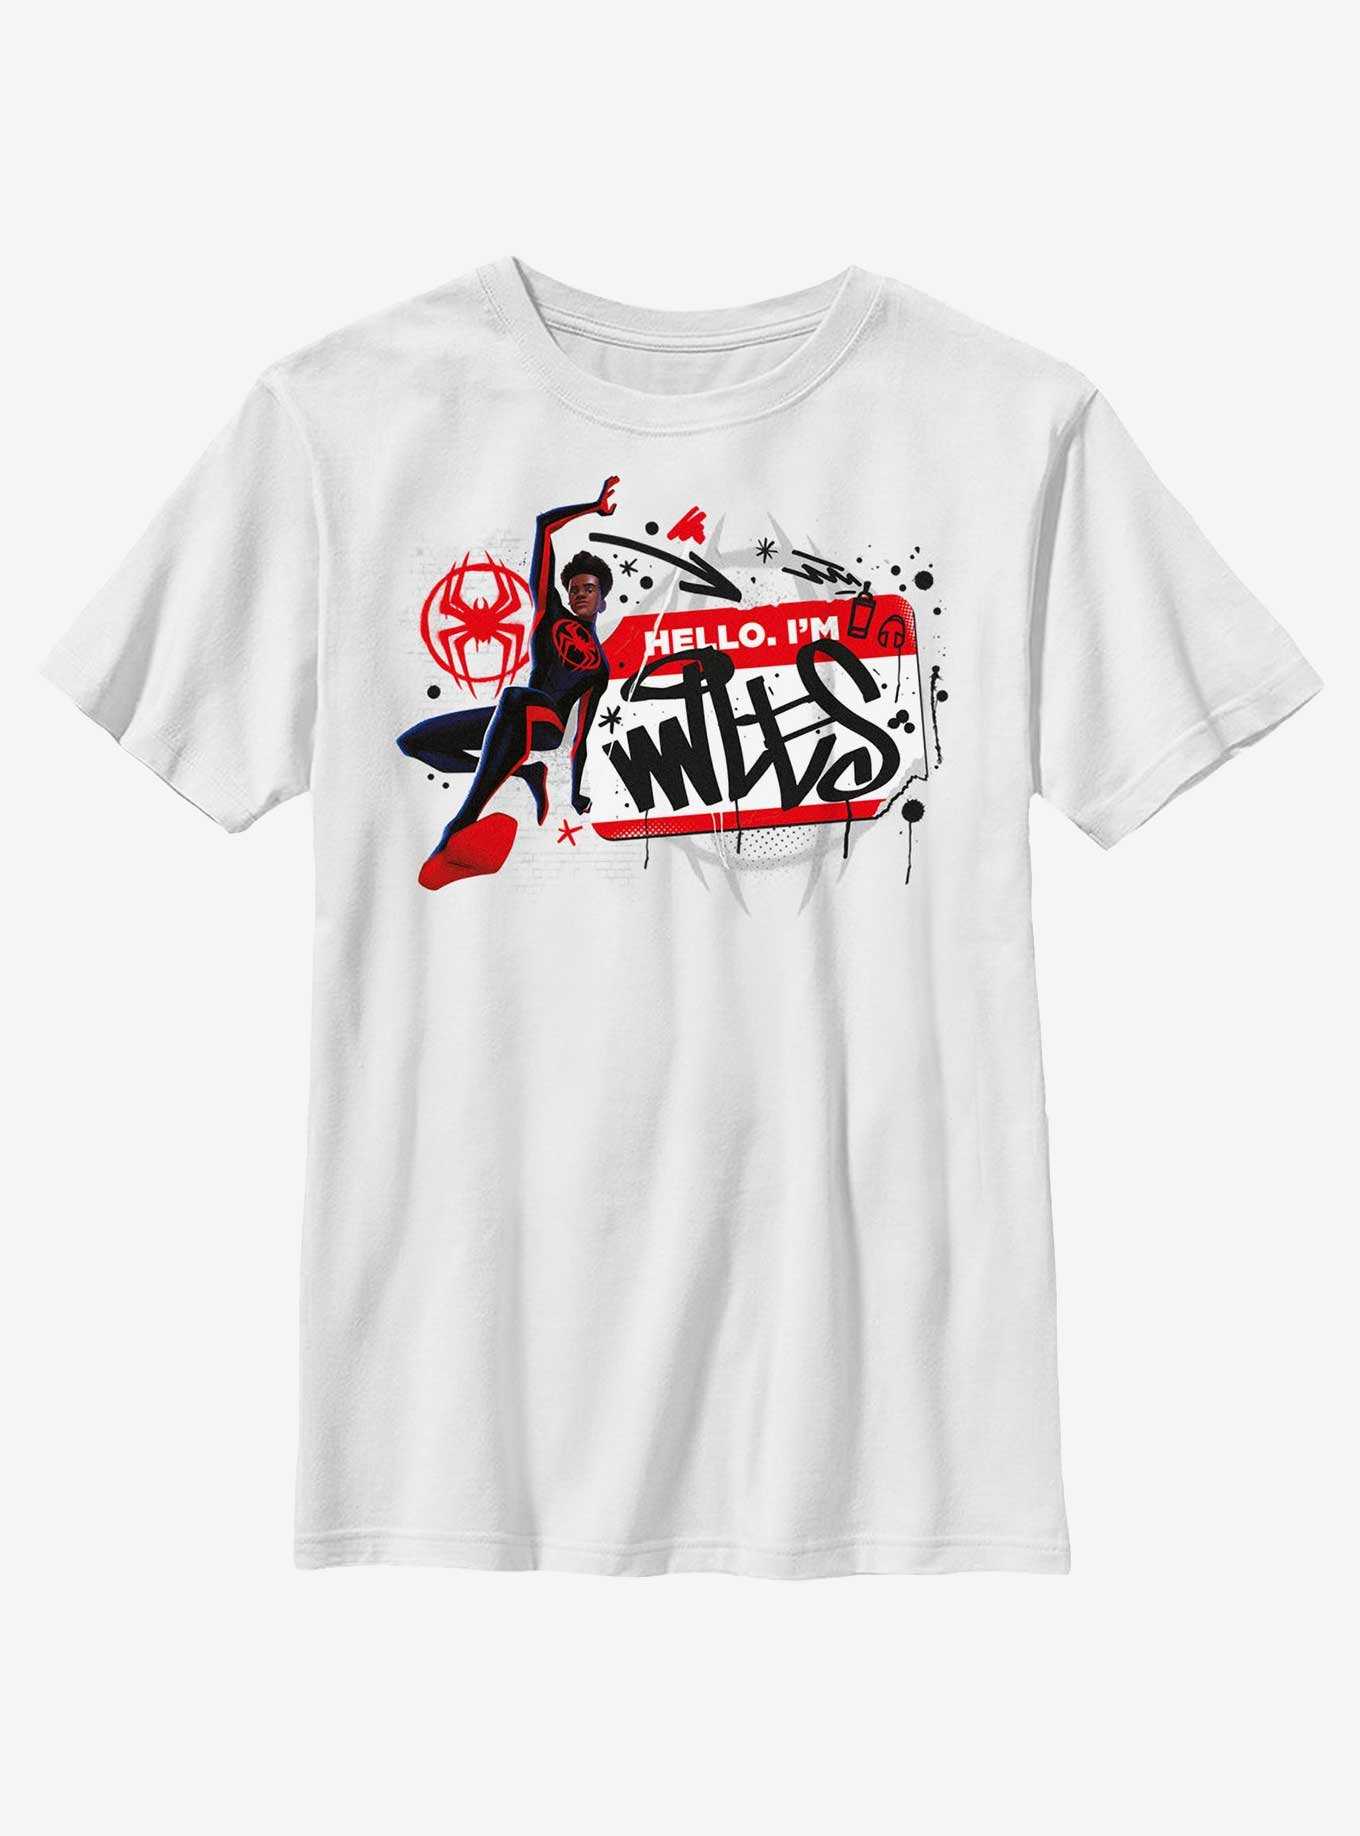 Marvel Spider-Man: Across The Spiderverse Miles Name Tag Youth T-Shirt, , hi-res